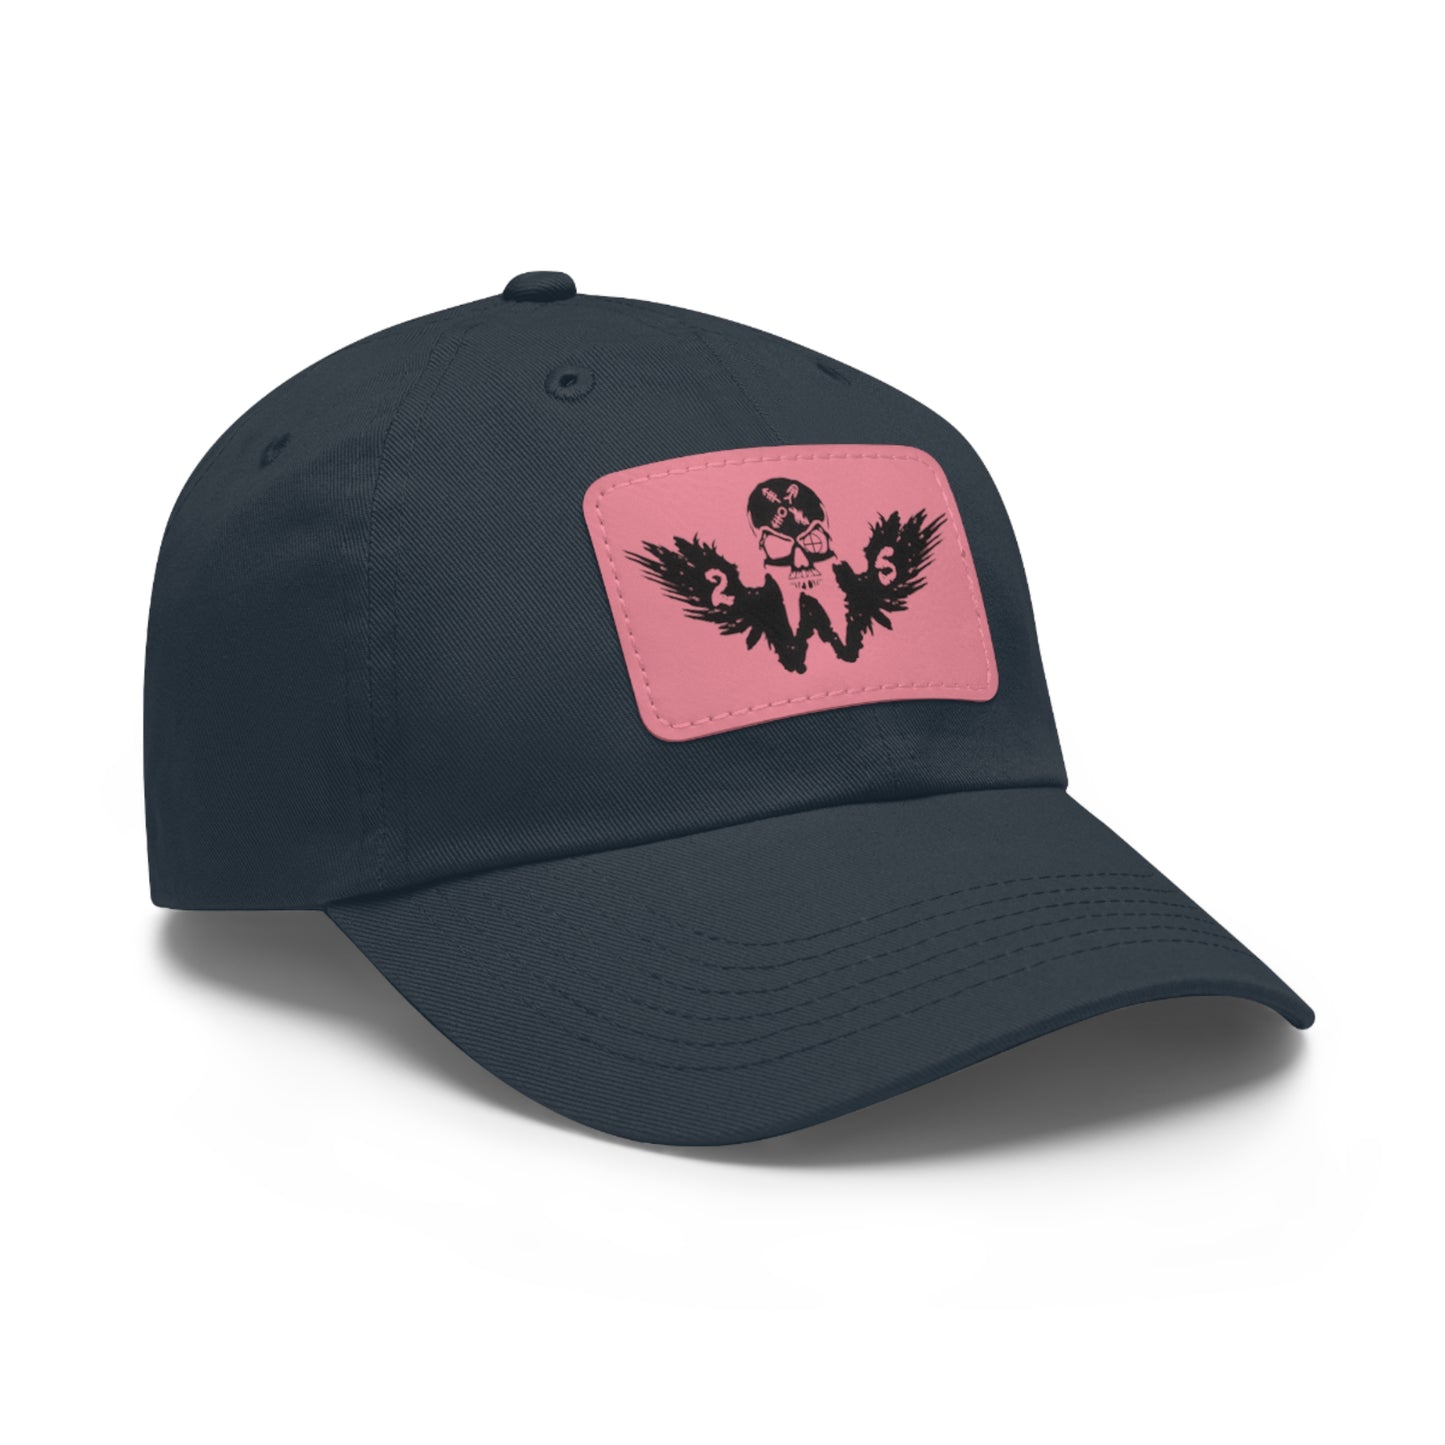 Weapons Co 2/5 Dad Hat with Leather Patch